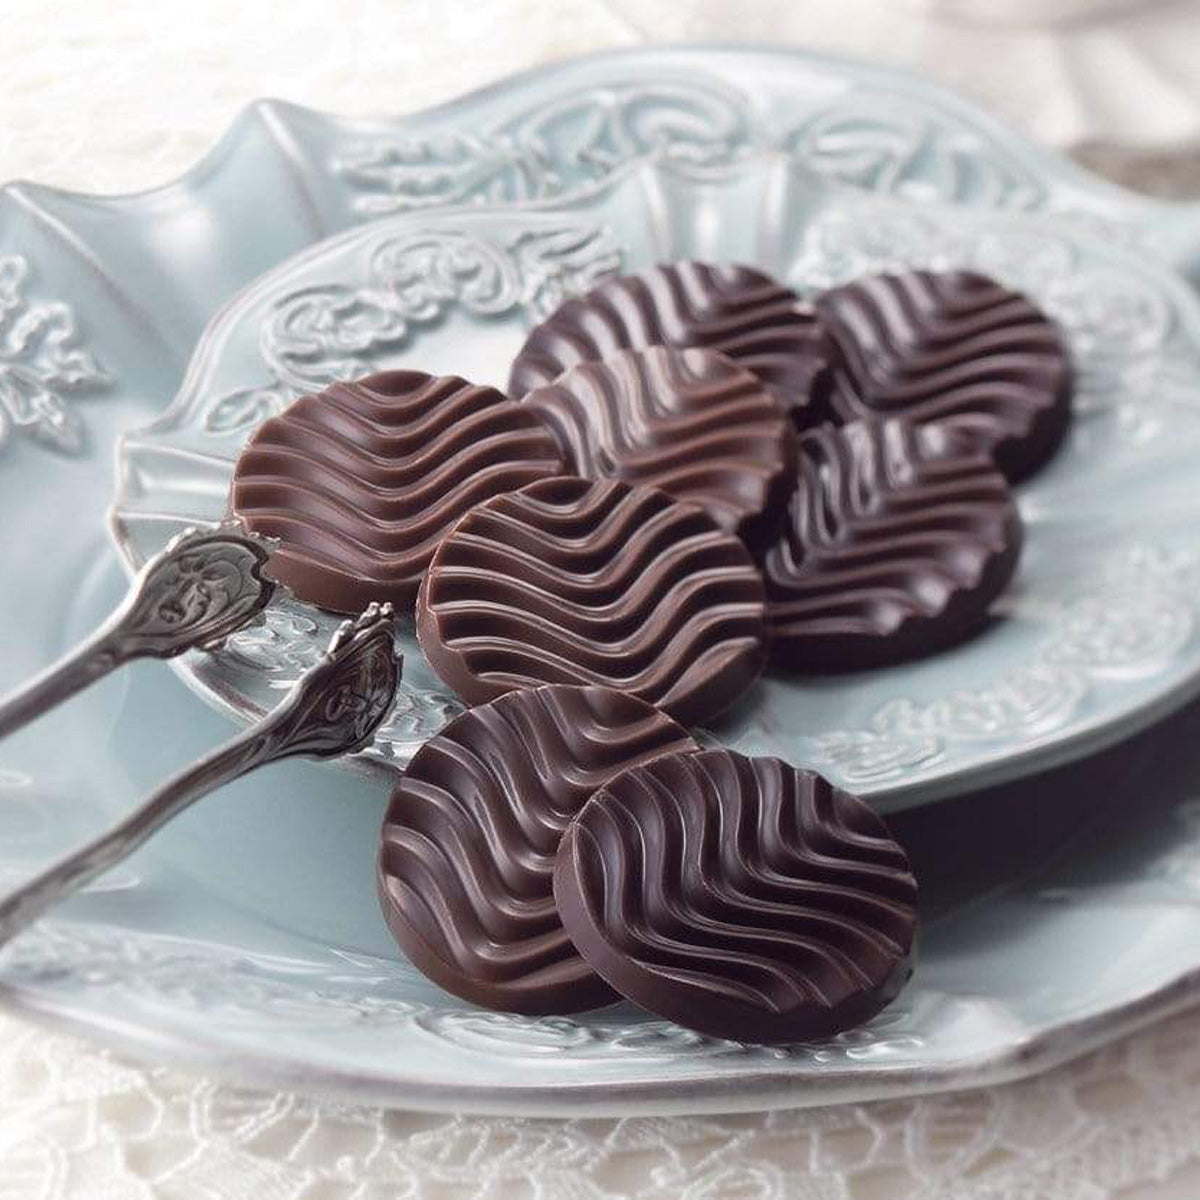 ROYCE' Chocolate - Pure Chocolate "Sweet & Milk" - Image shows brown chocolate discs with a waved texture placed on two light blue plates with engravings. Accents include a silver tong and a white lace table cloth. Background is in white color.